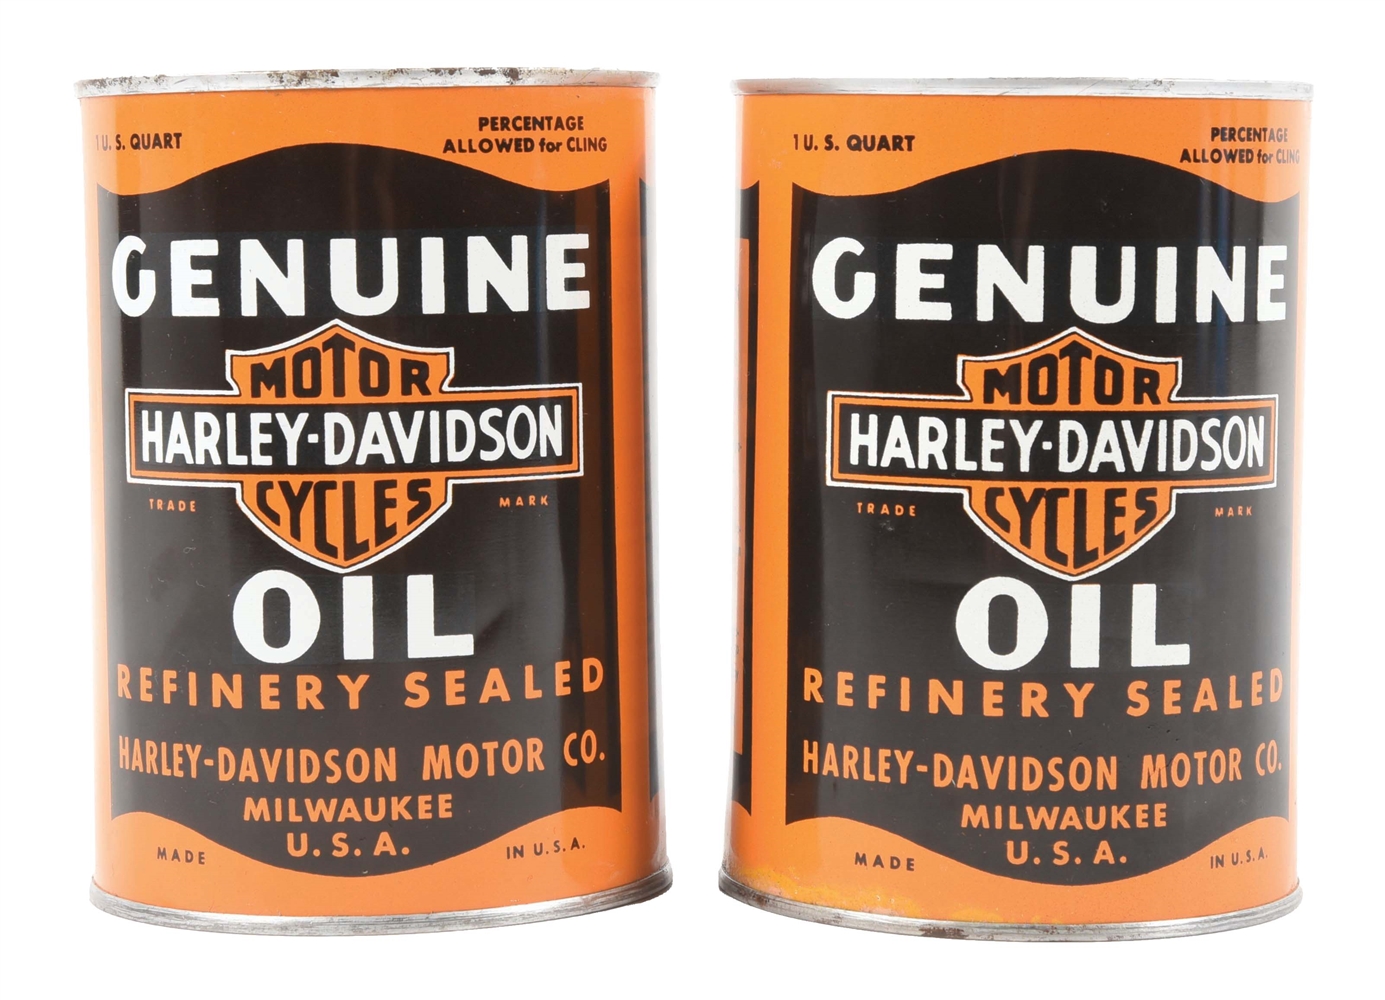 COLLECTION OF 2: GENUINE HARLEY-DAVIDSON MOTORCYCLE OILS 1 QT. CANS.